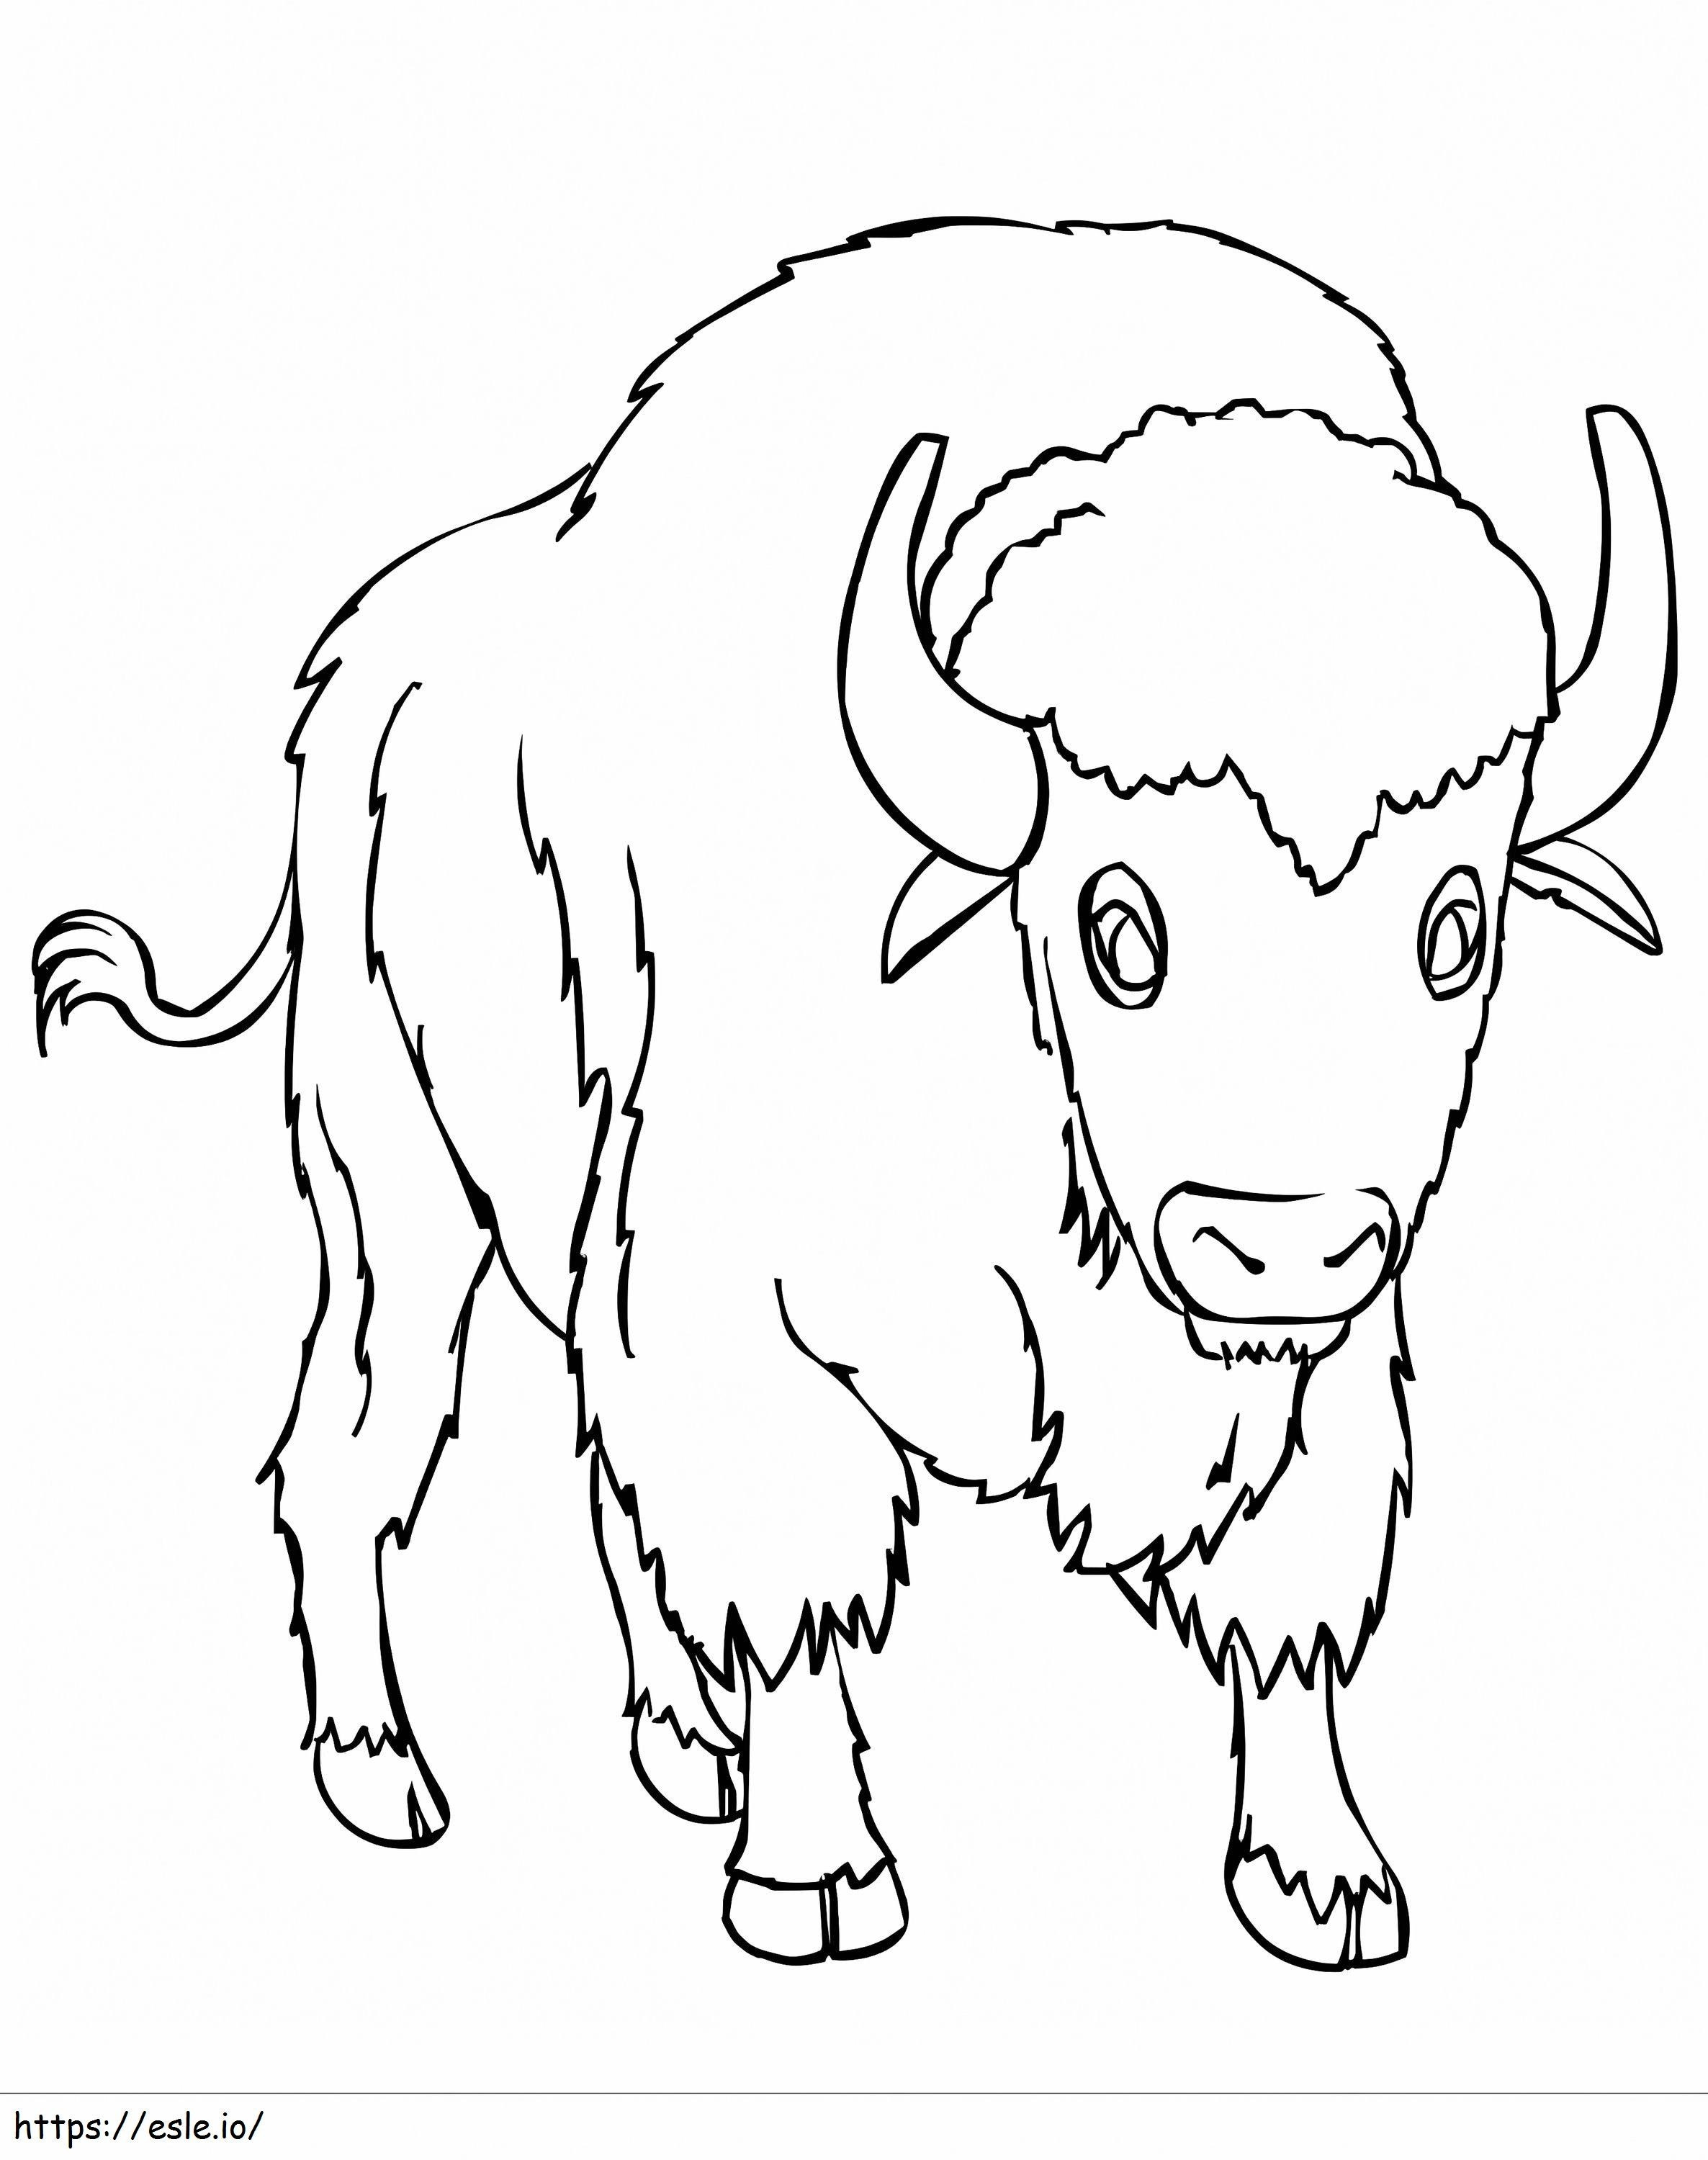 Bison 3 coloring page